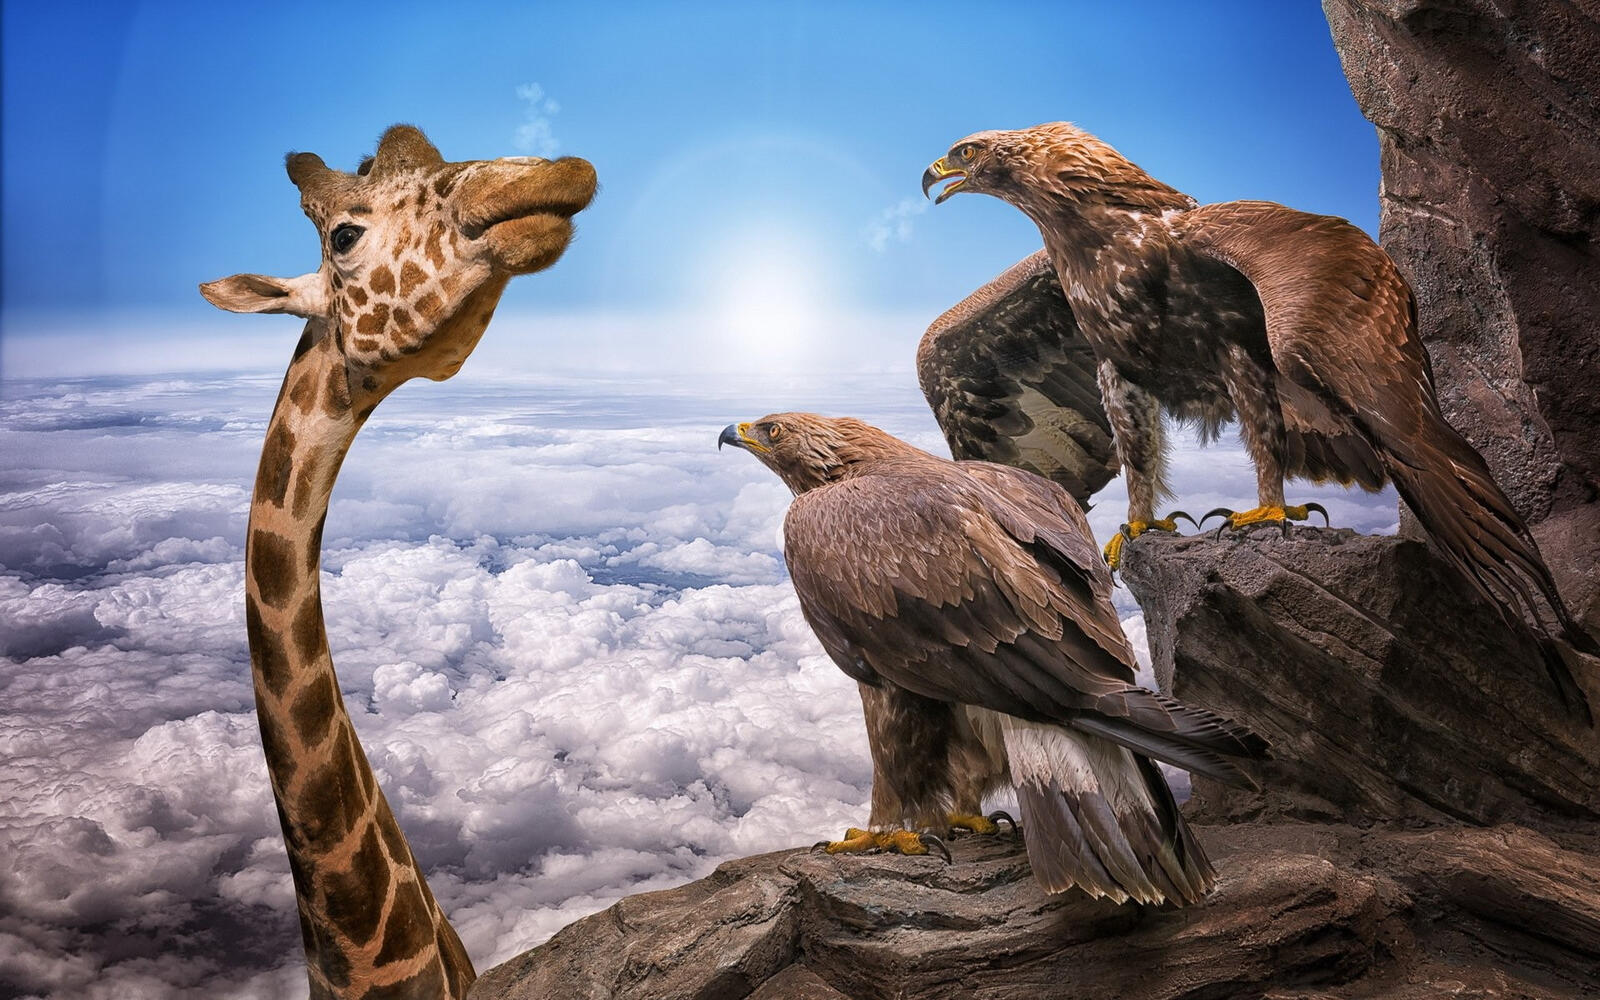 Free photo The giraffe looks at the eagles on top of the mountain